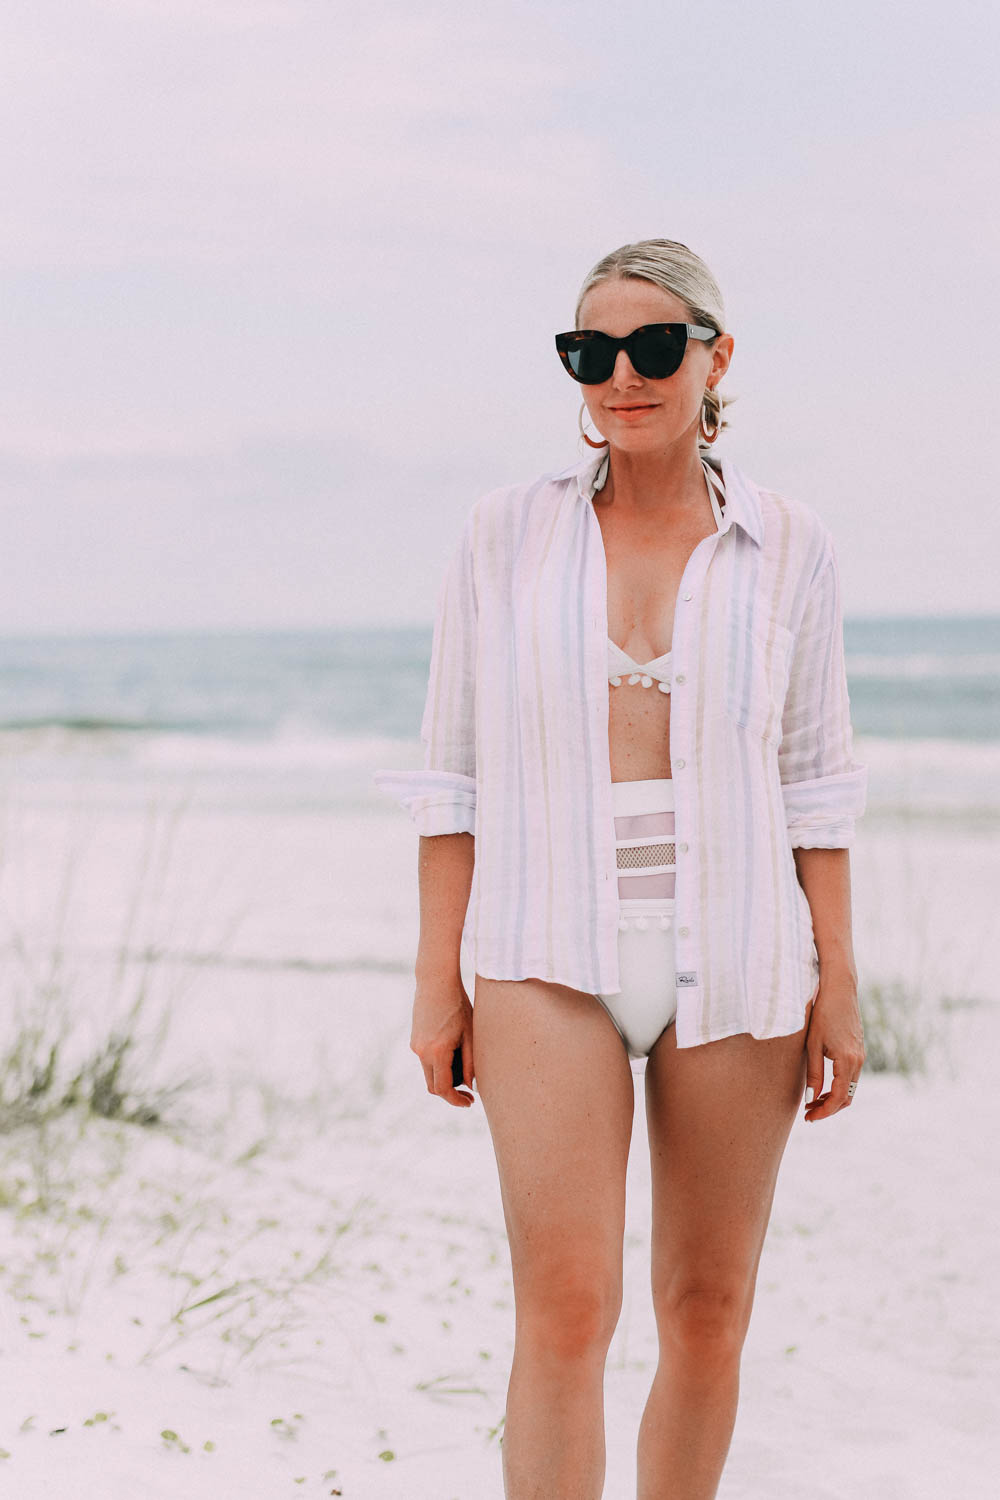 Amazon swimsuit, Fashion blogger Busbee Style wearing white bikini with pom poms from Amazon with striped Rails button down shirt on Florida beach